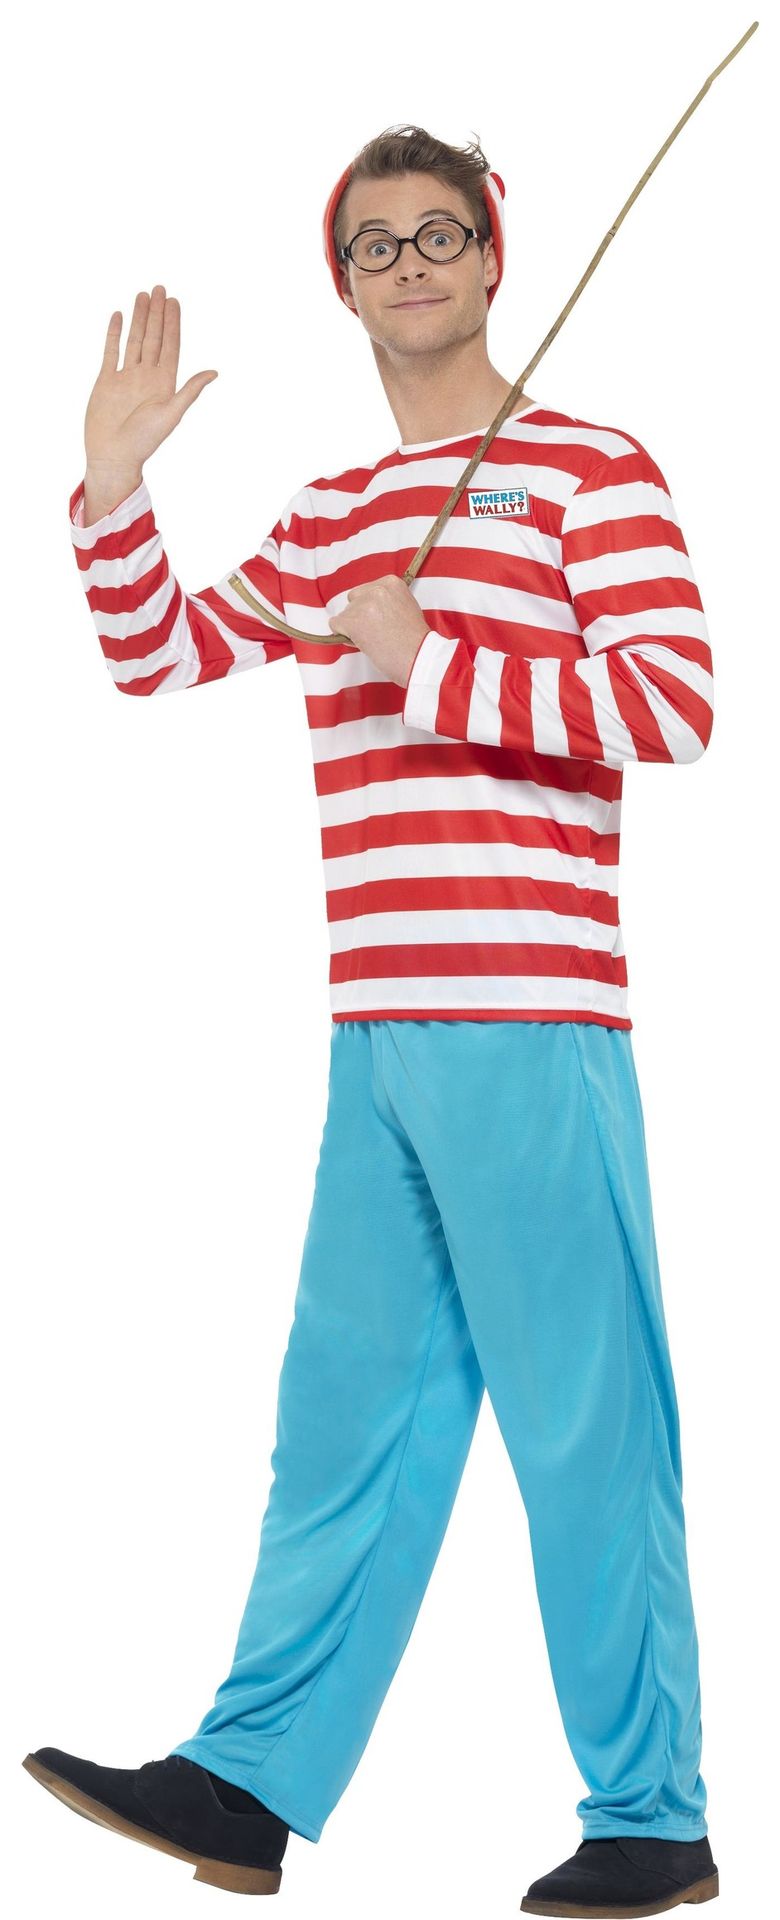 Where's Wally outfit